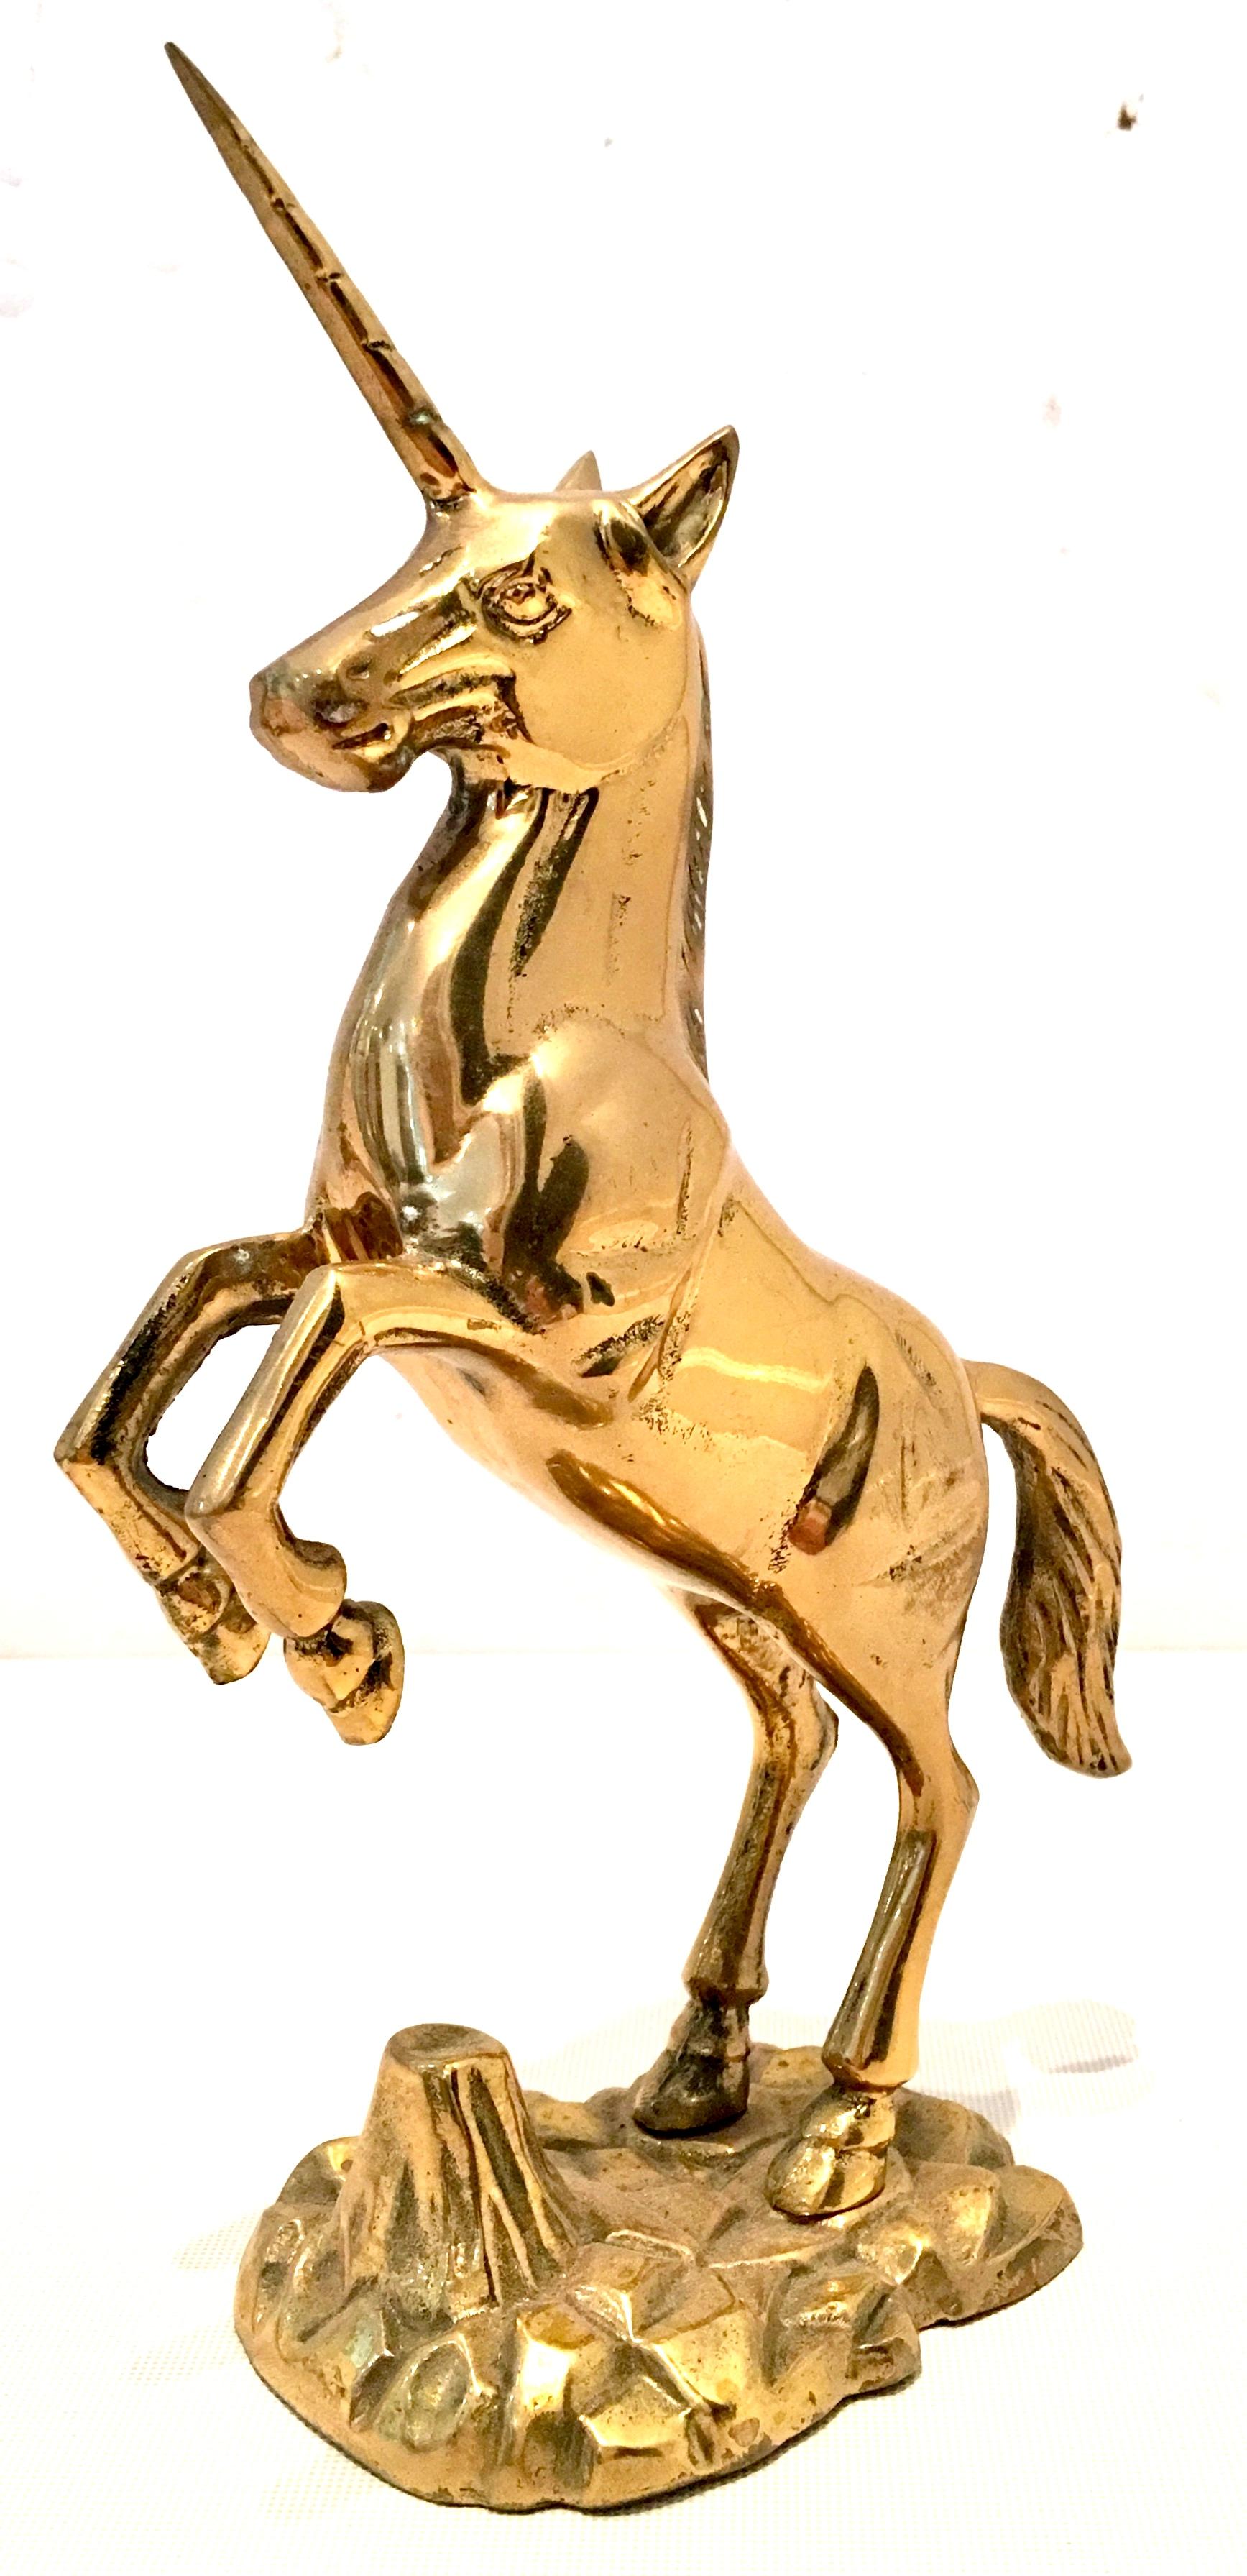 Mid 20th-Century solid brass unicorn sculpture. This heavy weighted polished solid brass unicorn sculpture is mounted on abstract faux solid brass rock plateau.